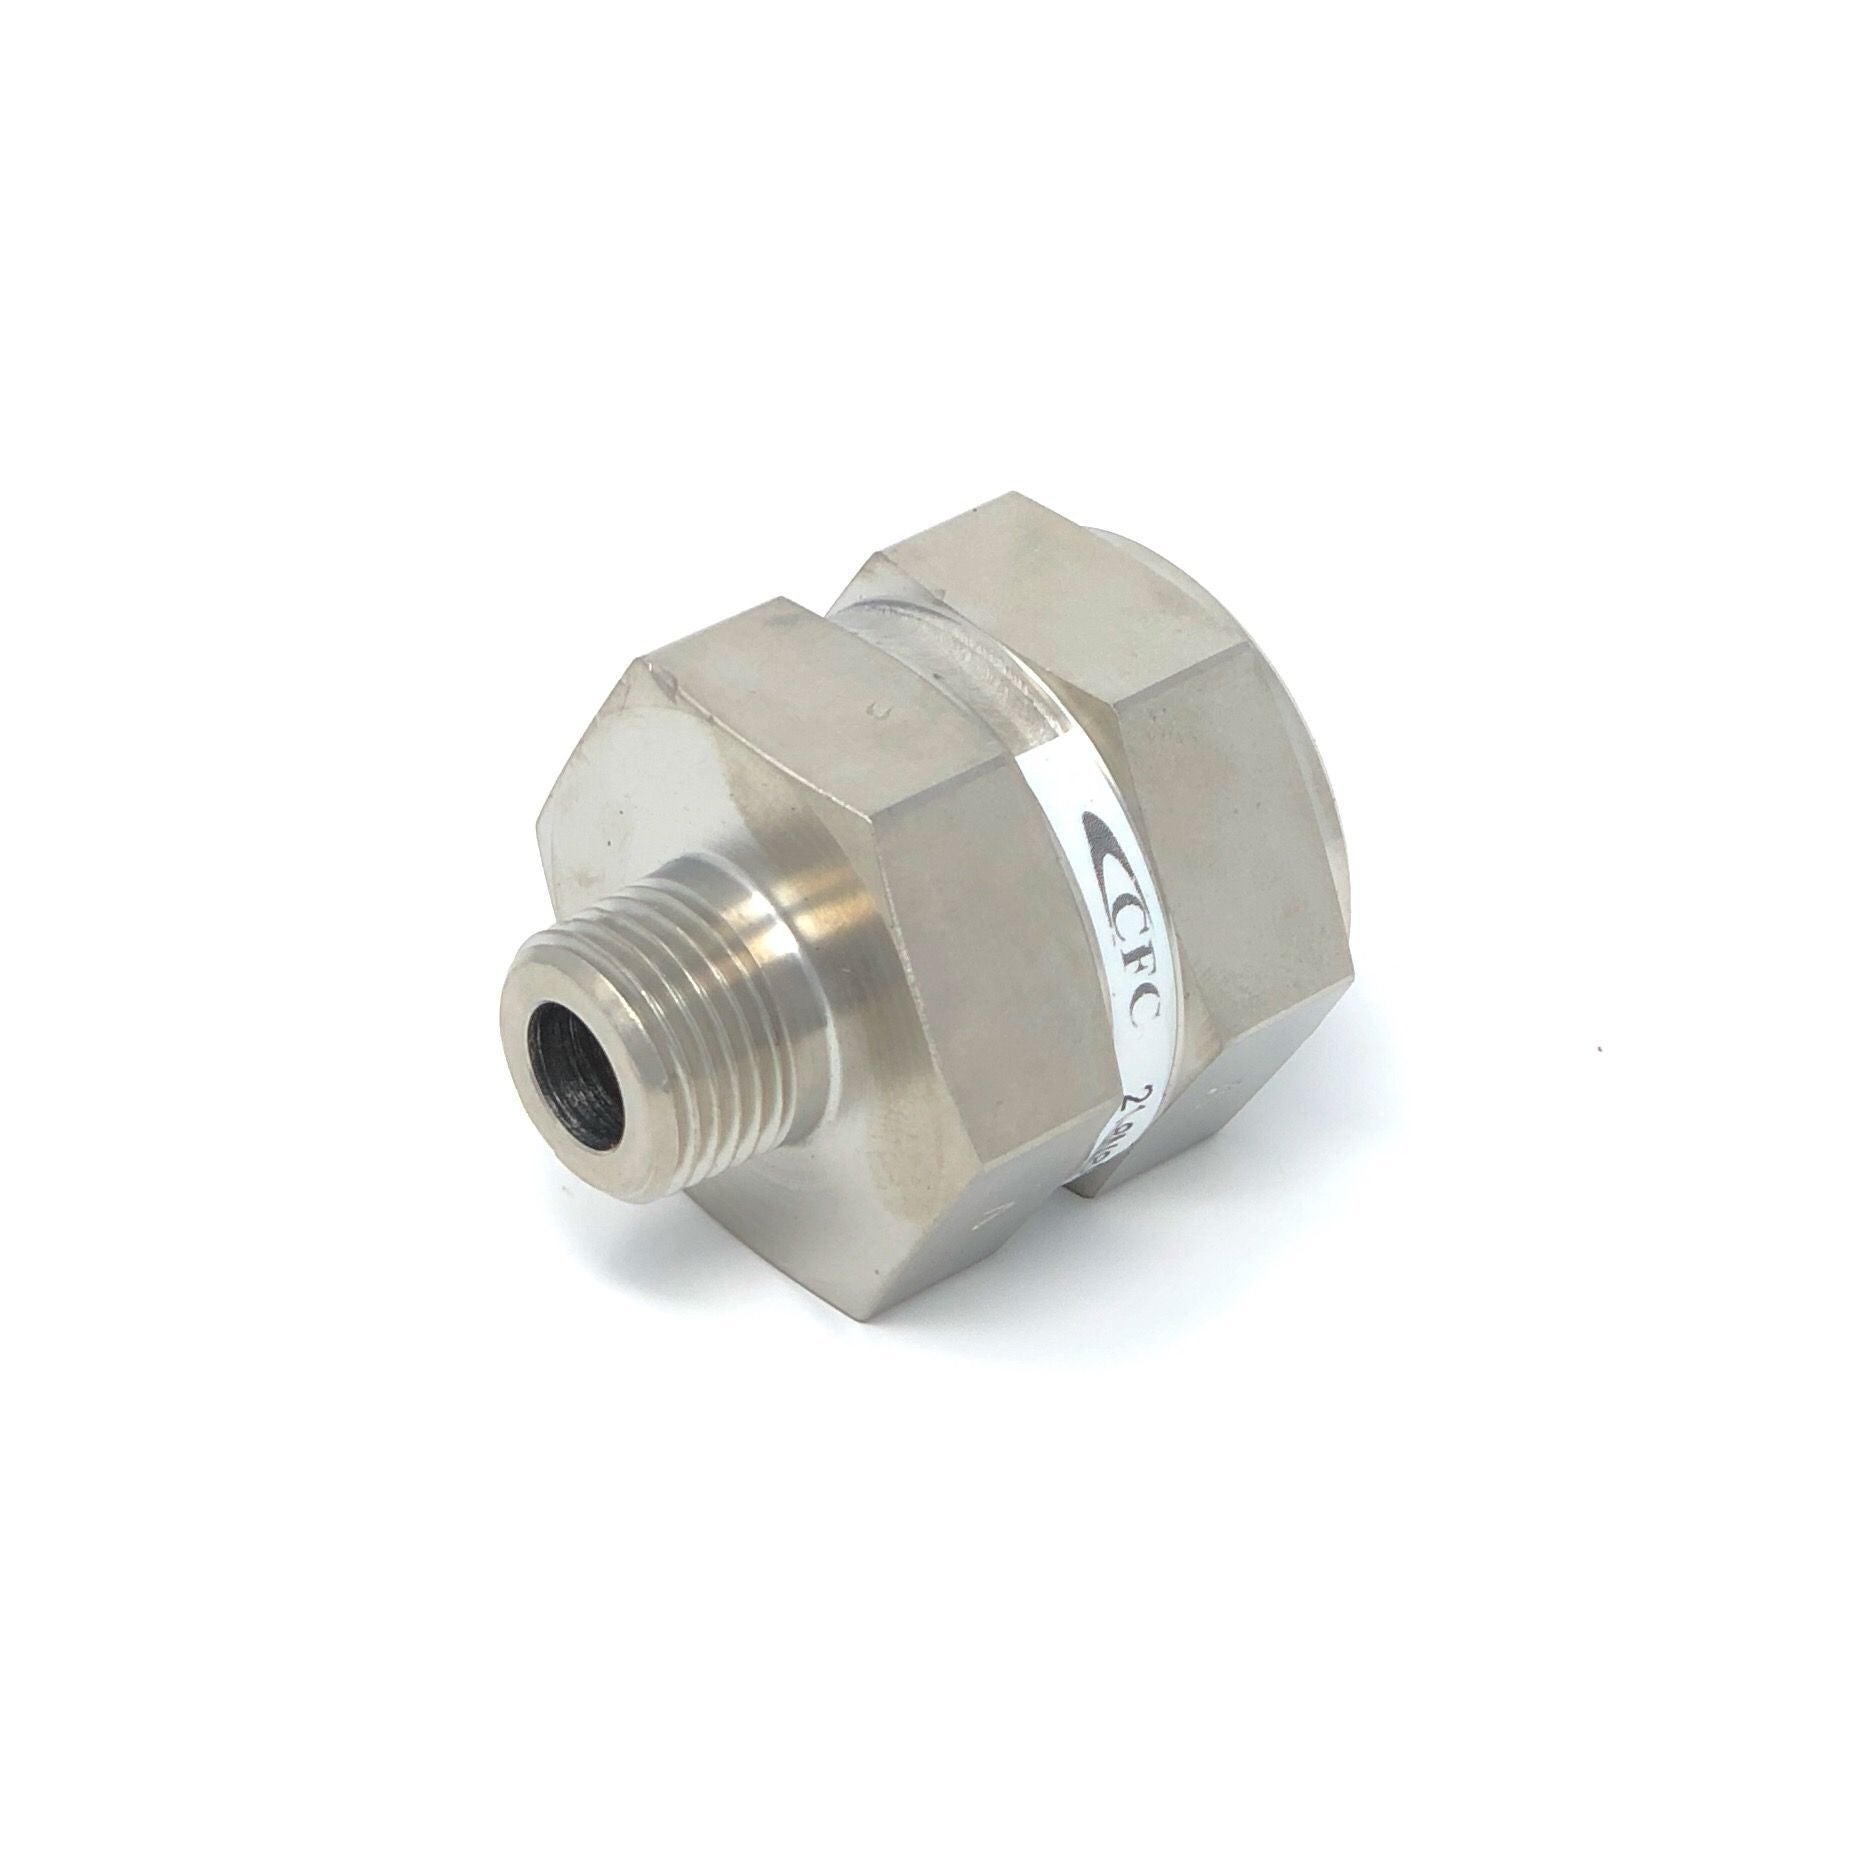 21-4M4M-18S : Chase High Pressure Inline Filter, 6000psi, #4 SAE (1/4"), 18 Micron, No Visual Indicator, No Bypass